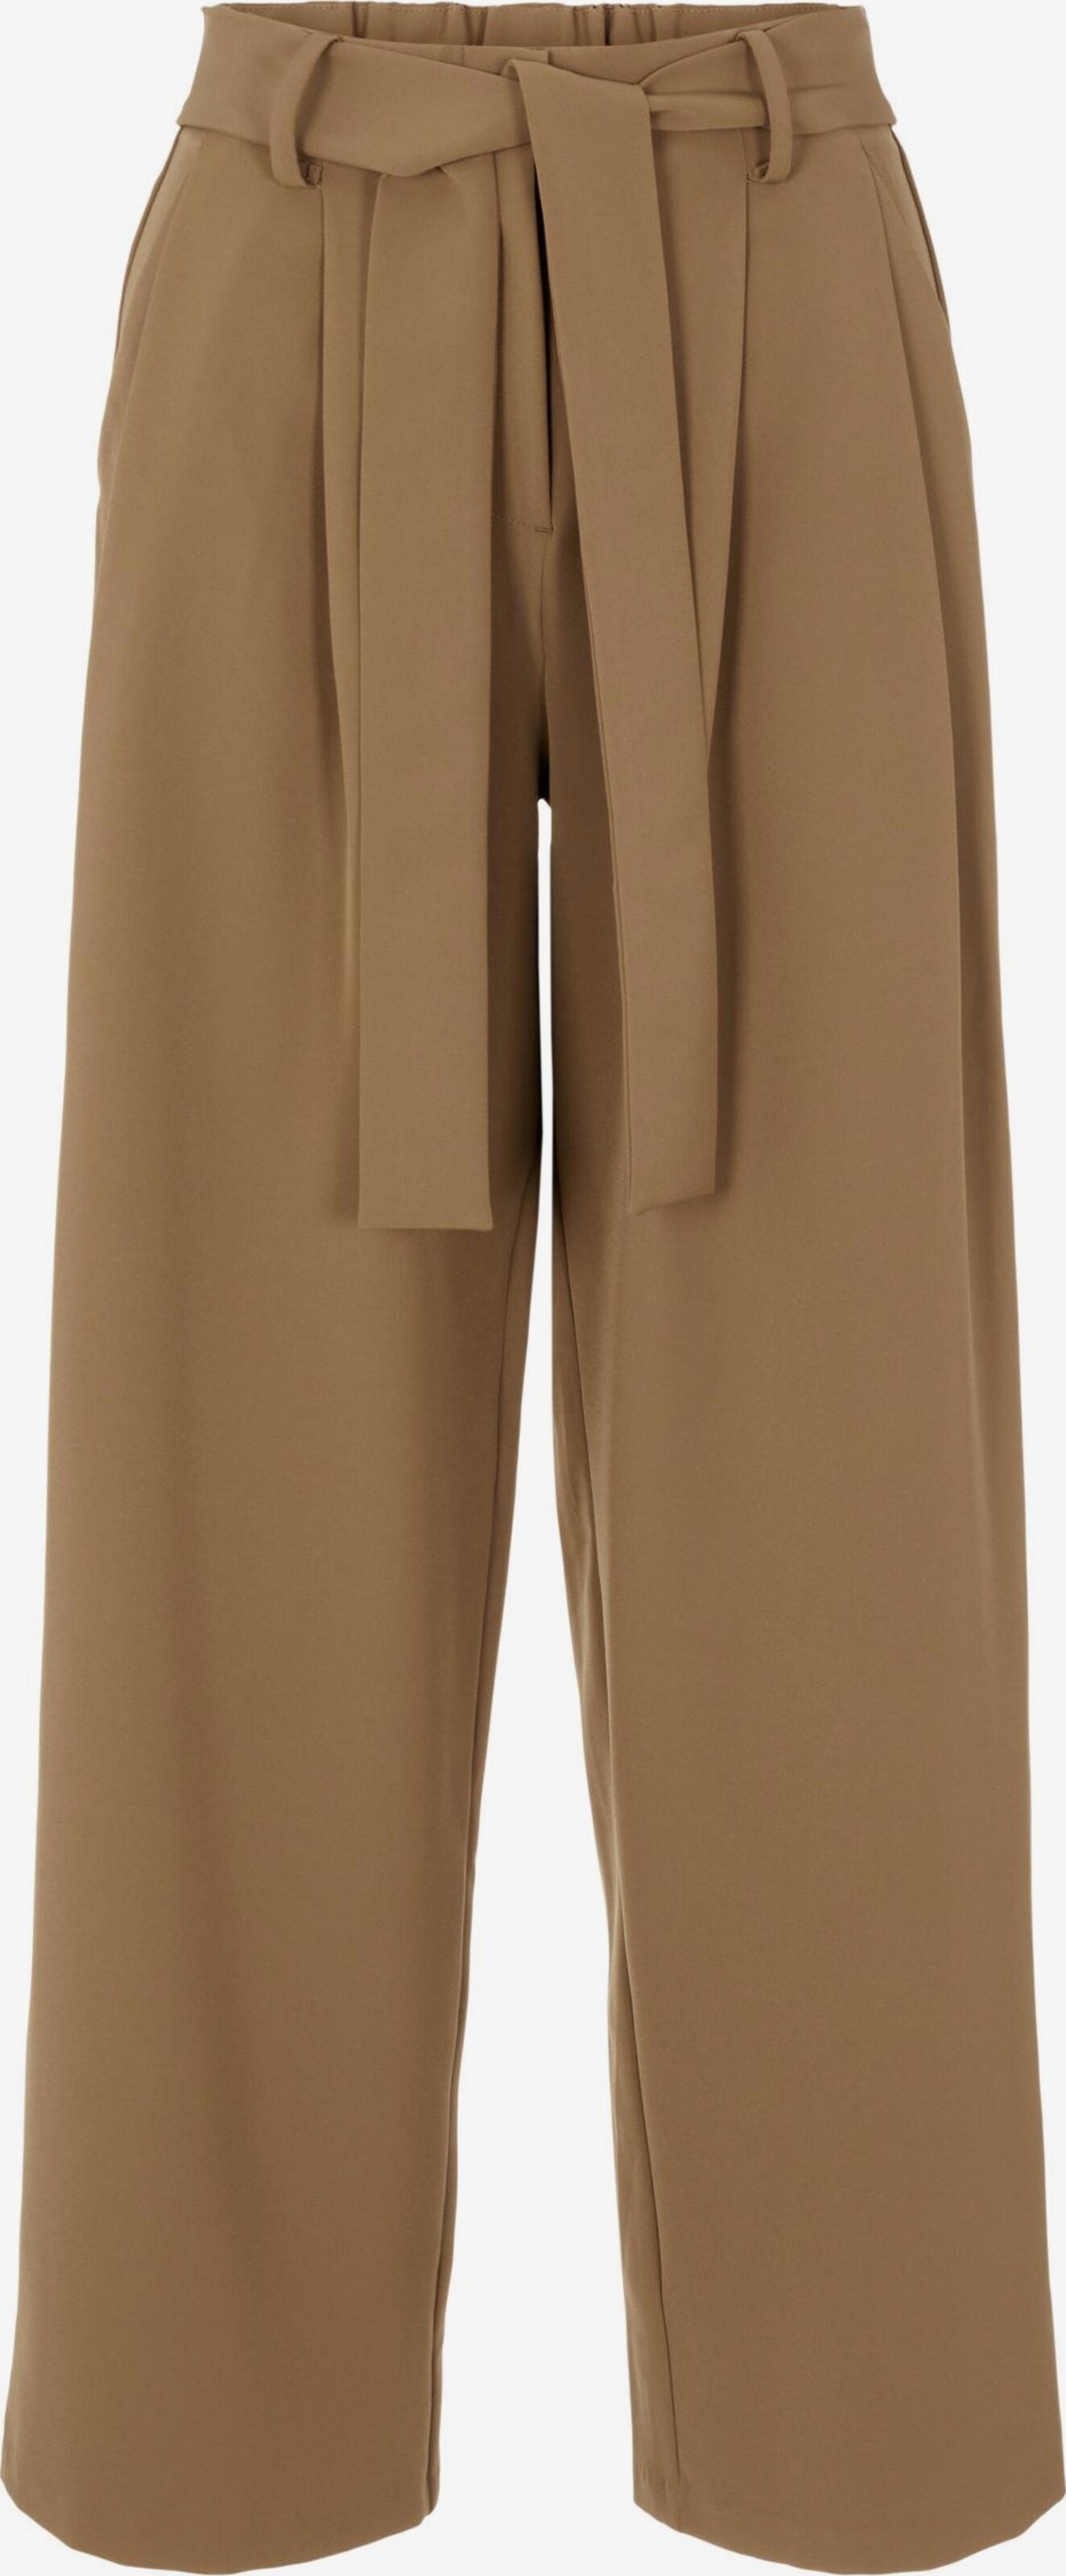 Håndfuld Forbandet operatør Pleat-front trousers on sale for women | Buy online | ABOUT YOU